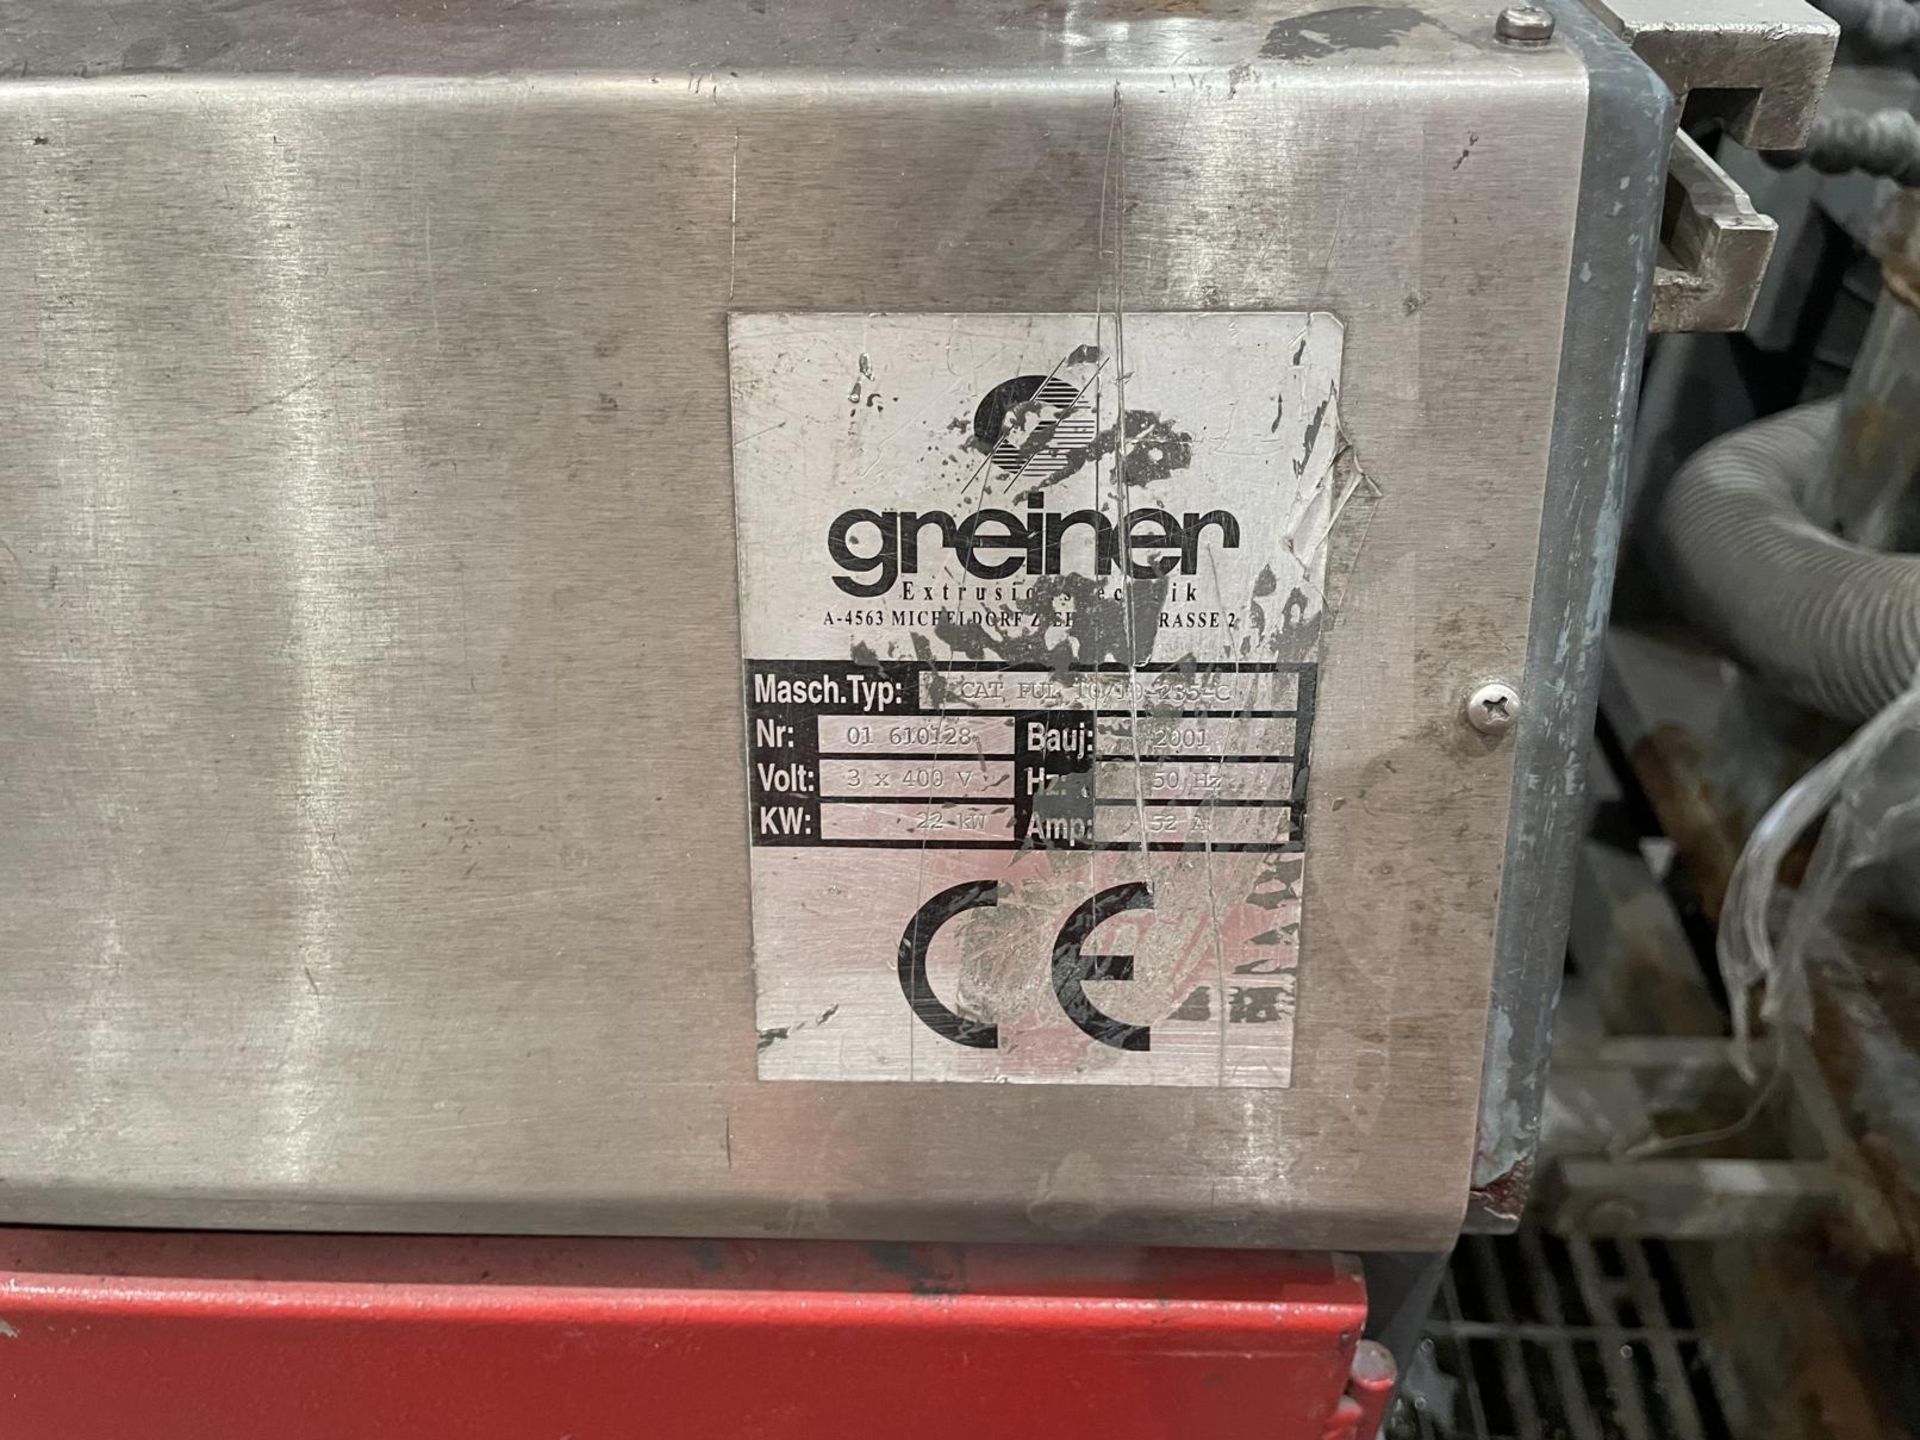 Greiner CAL PUL 10/10-235-C Combination Extrusion Haul Off and Cut to Length Machine Serial No. 01- - Image 3 of 4